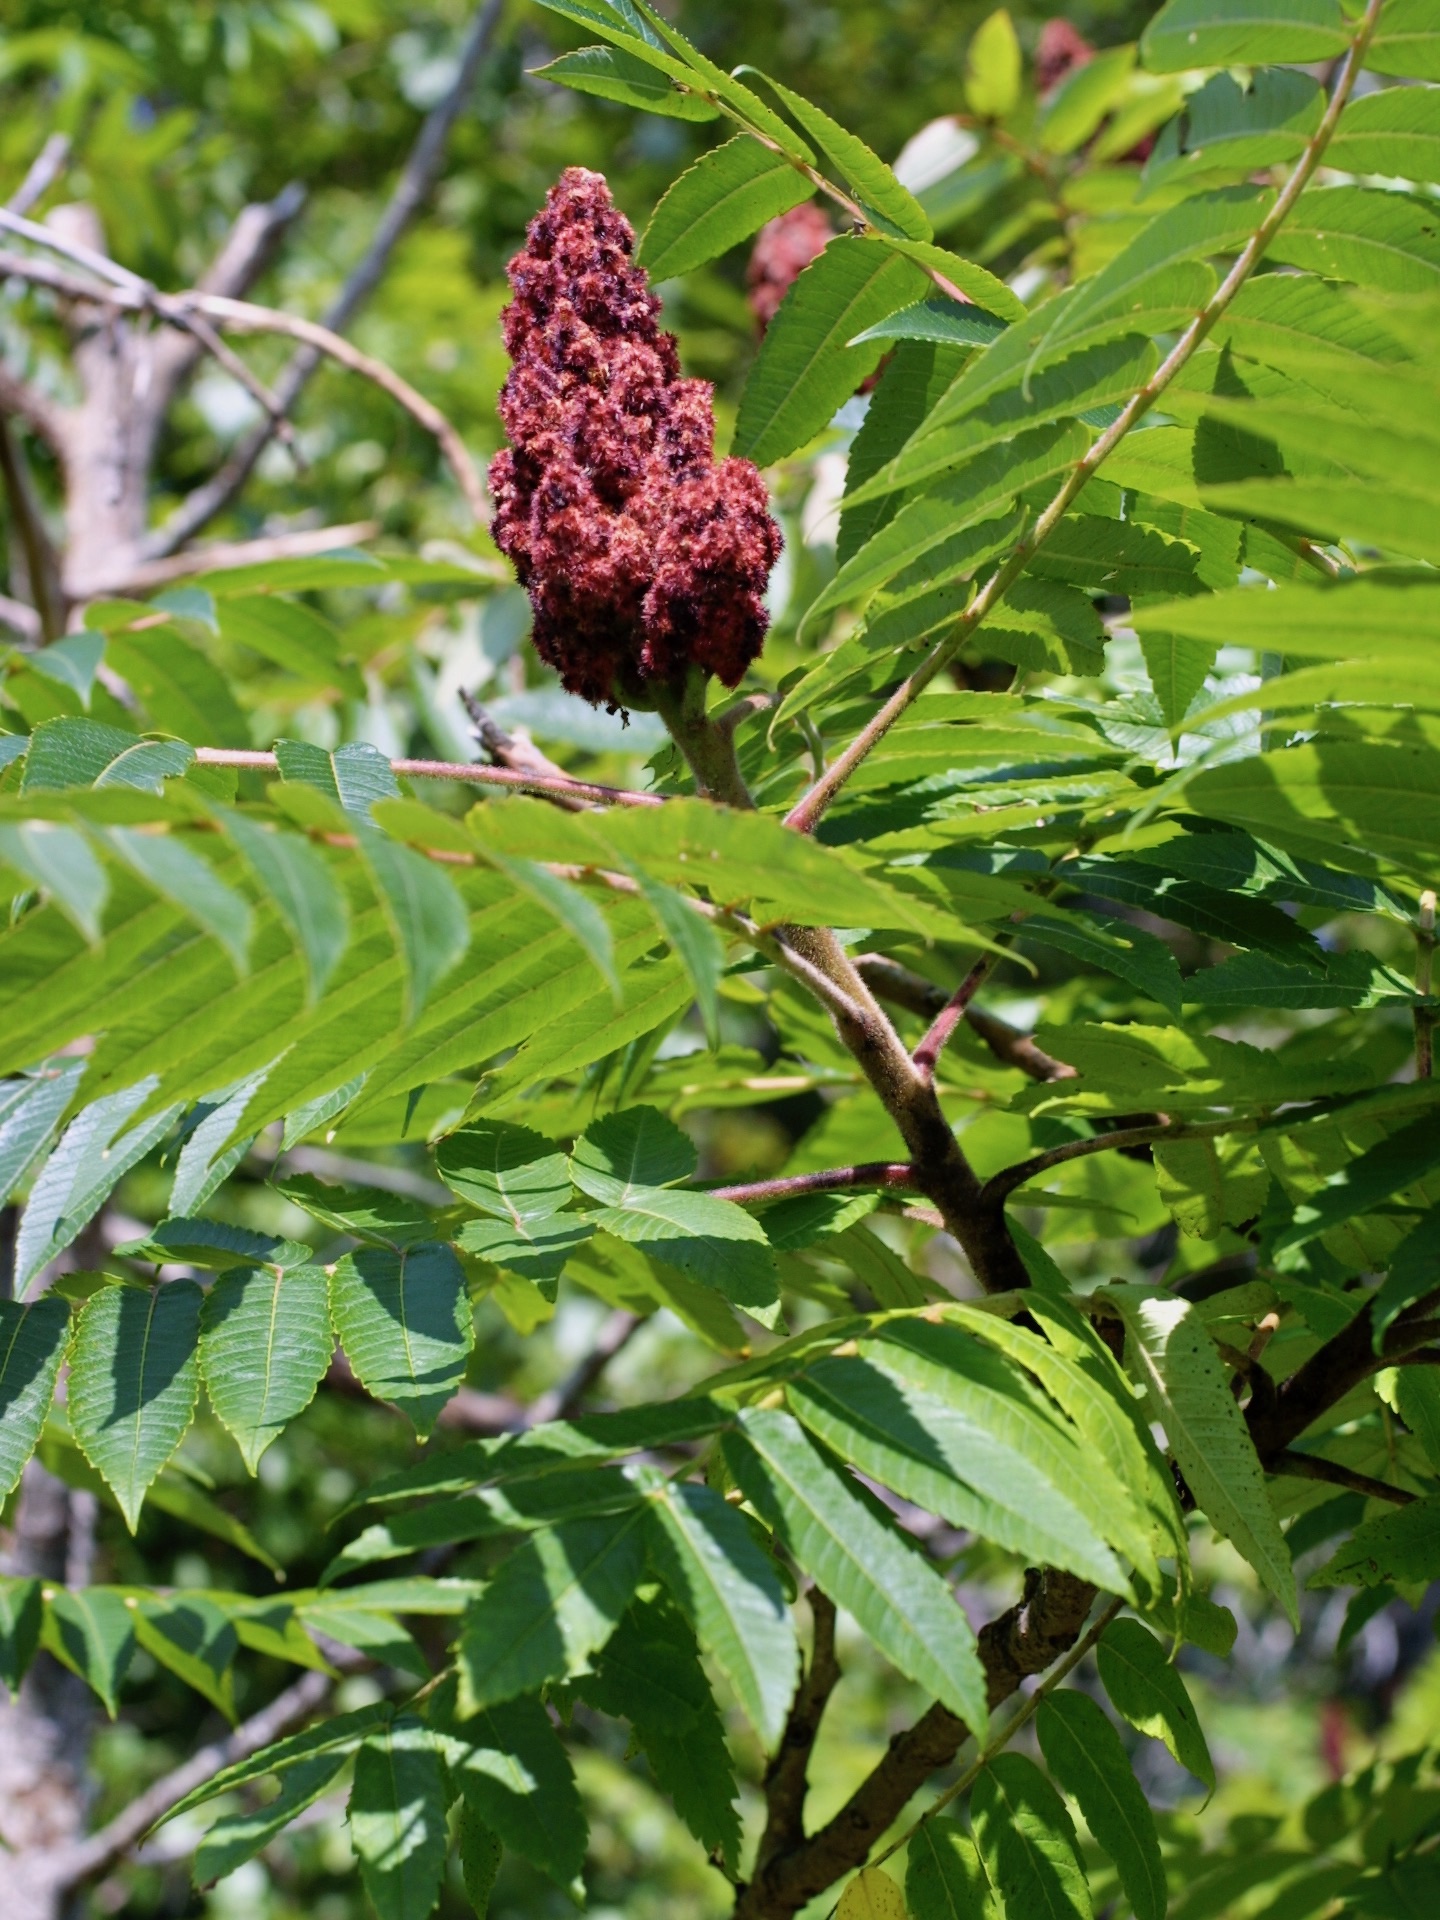 The Scientific Name is Rhus typhina. You will likely hear them called Staghorn Sumac. This picture shows the Dense cluster of hairy, red fruit, and stems densely covered with long hairs of Rhus typhina